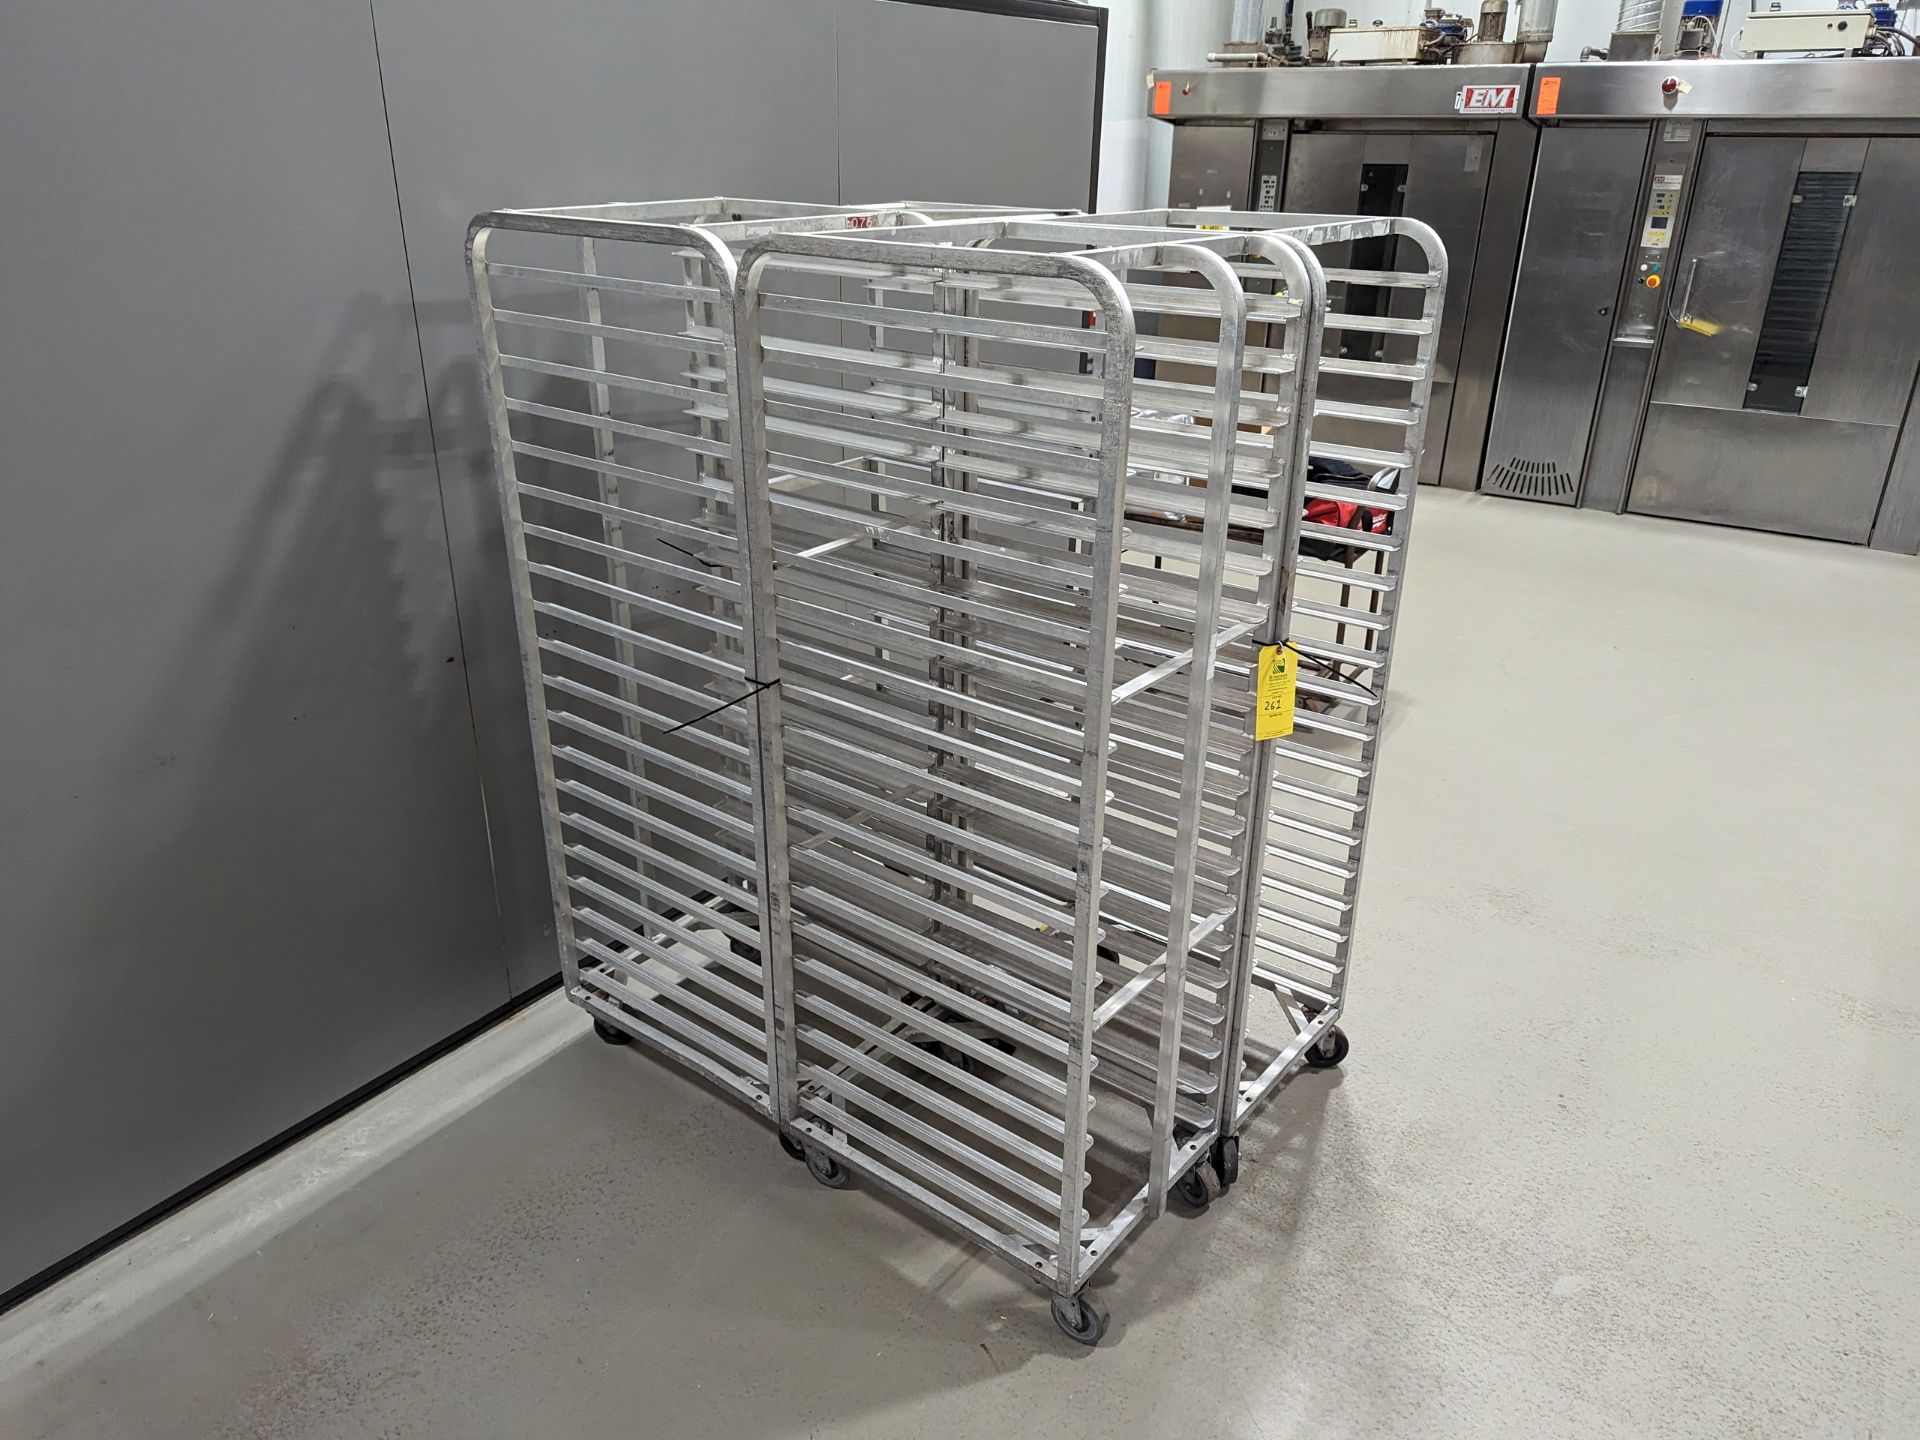 Lot of 4 Single Wide Aluminum Bakery Racks, Dimensions LxWxH: 53x41x69 Measurements are for lot of - Image 3 of 7